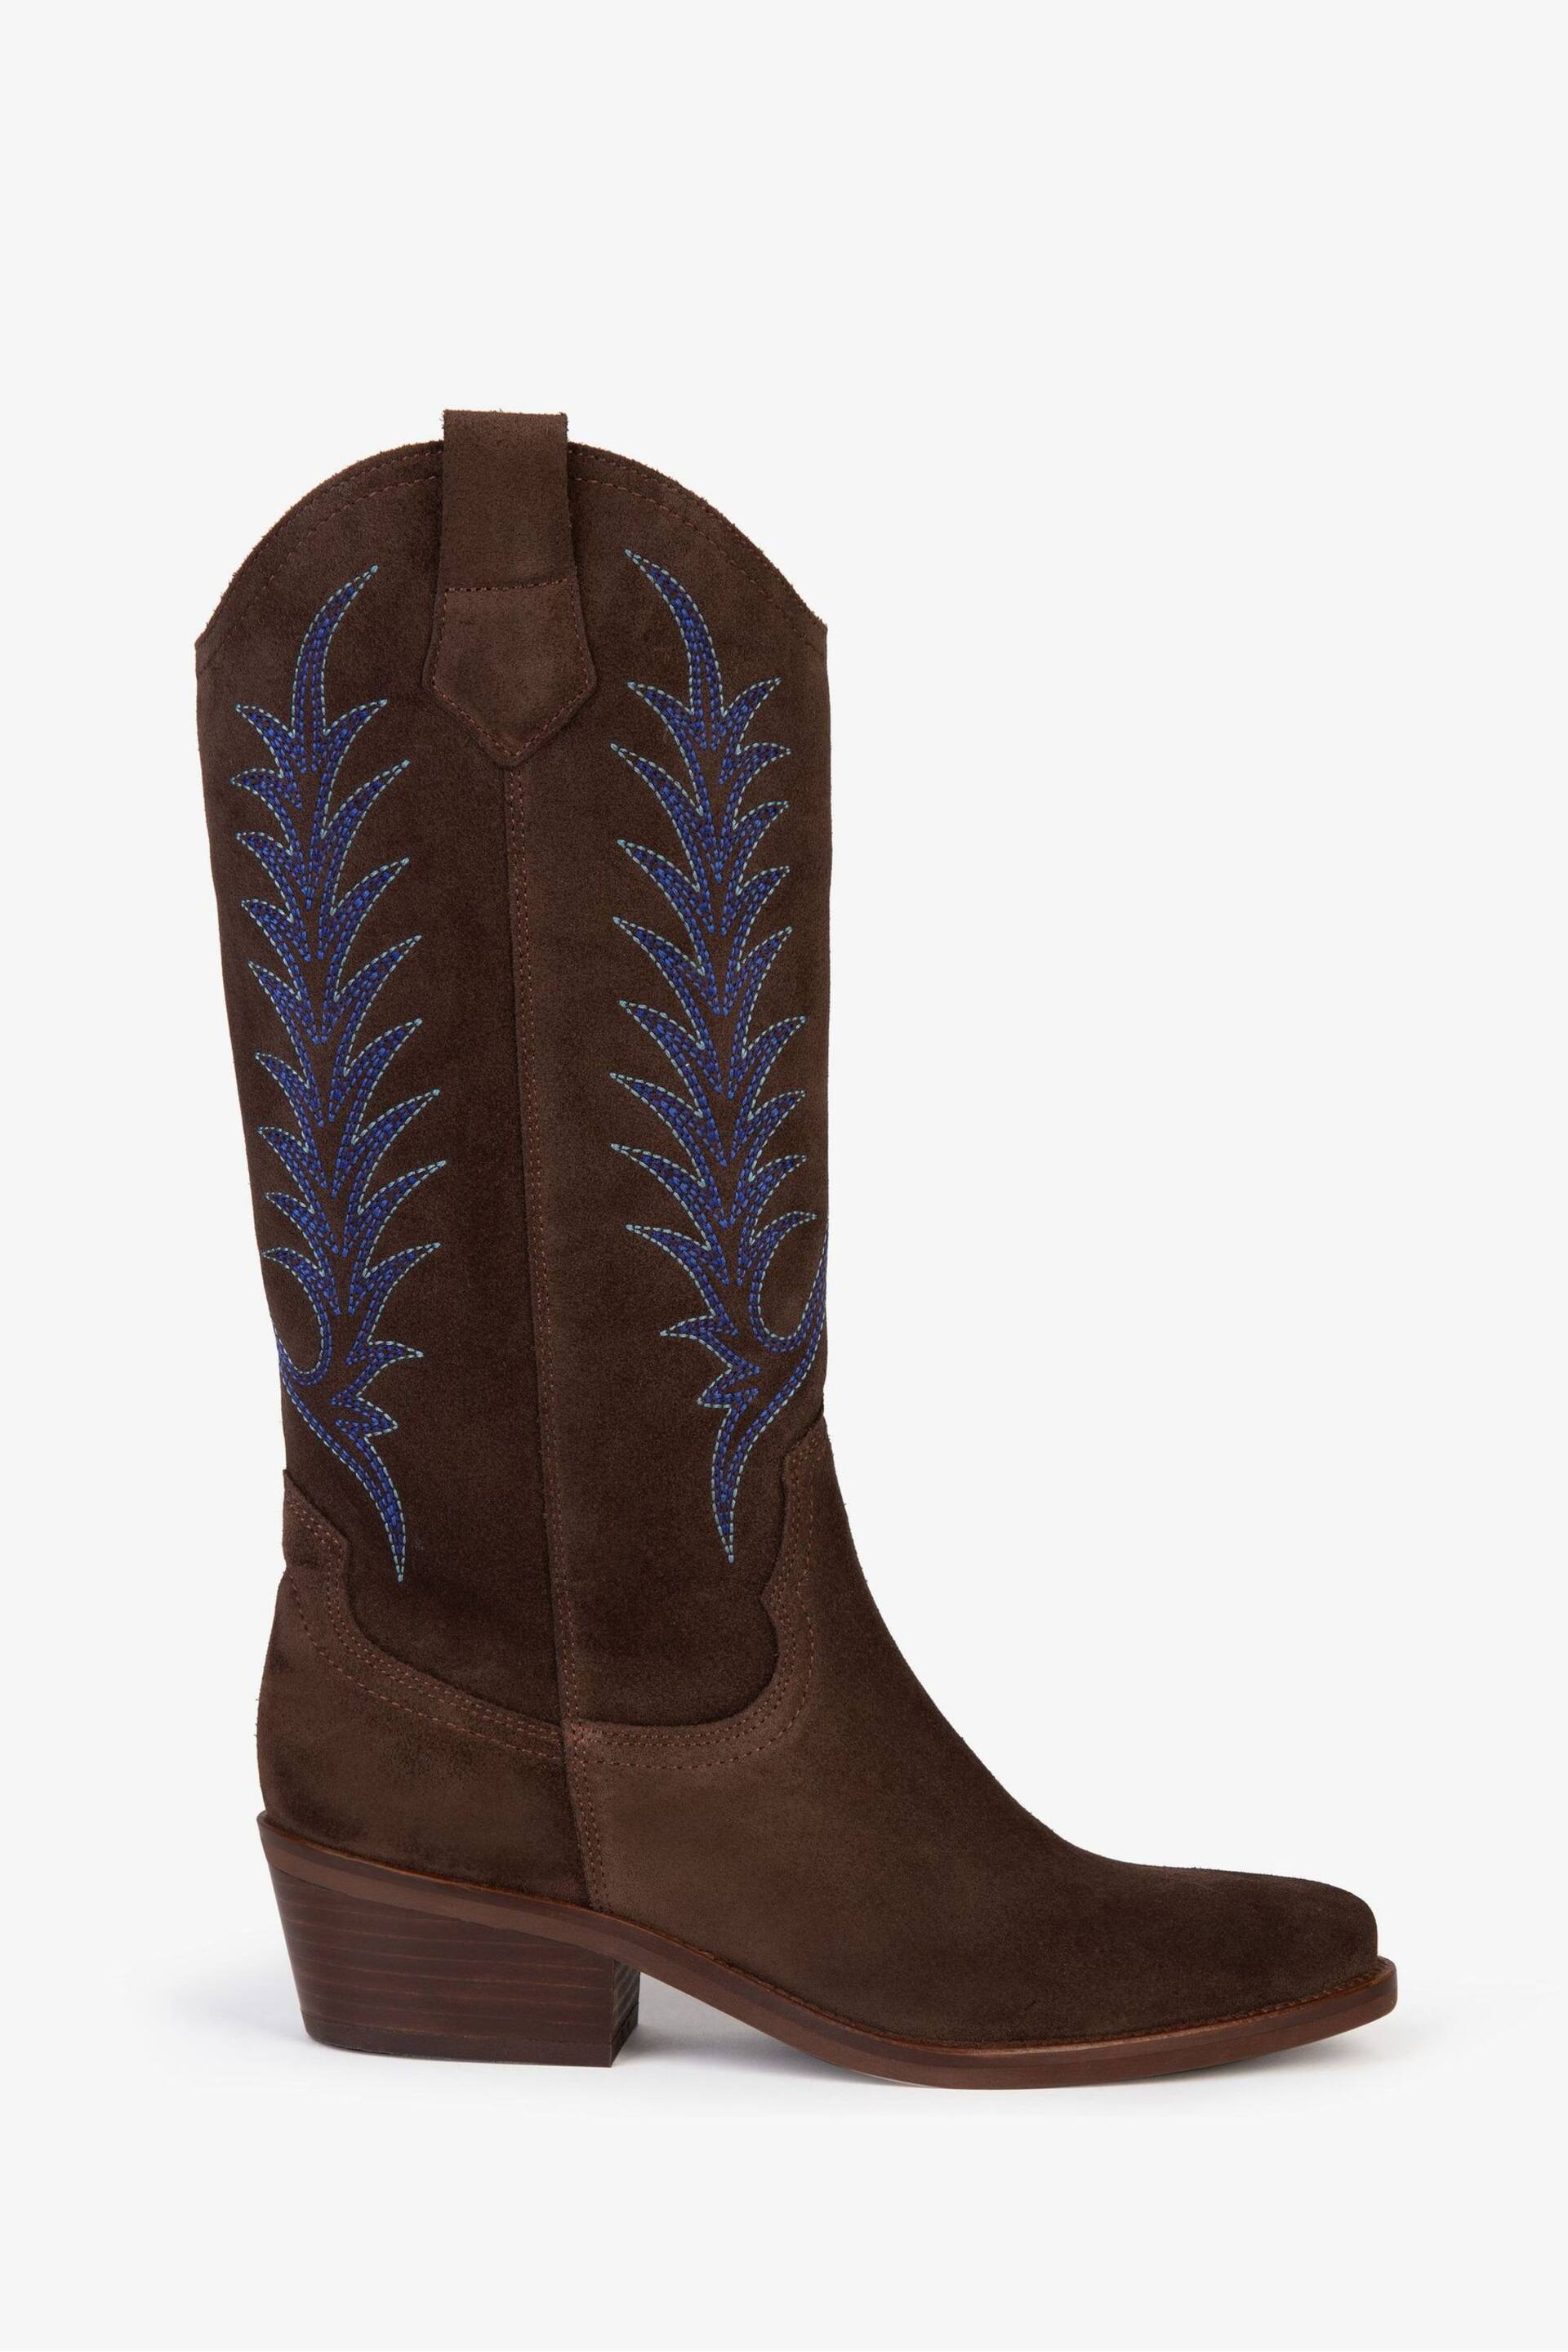 Penelope Chilvers Goldie Embroidered Cowboy Brown Boots - Image 1 of 7